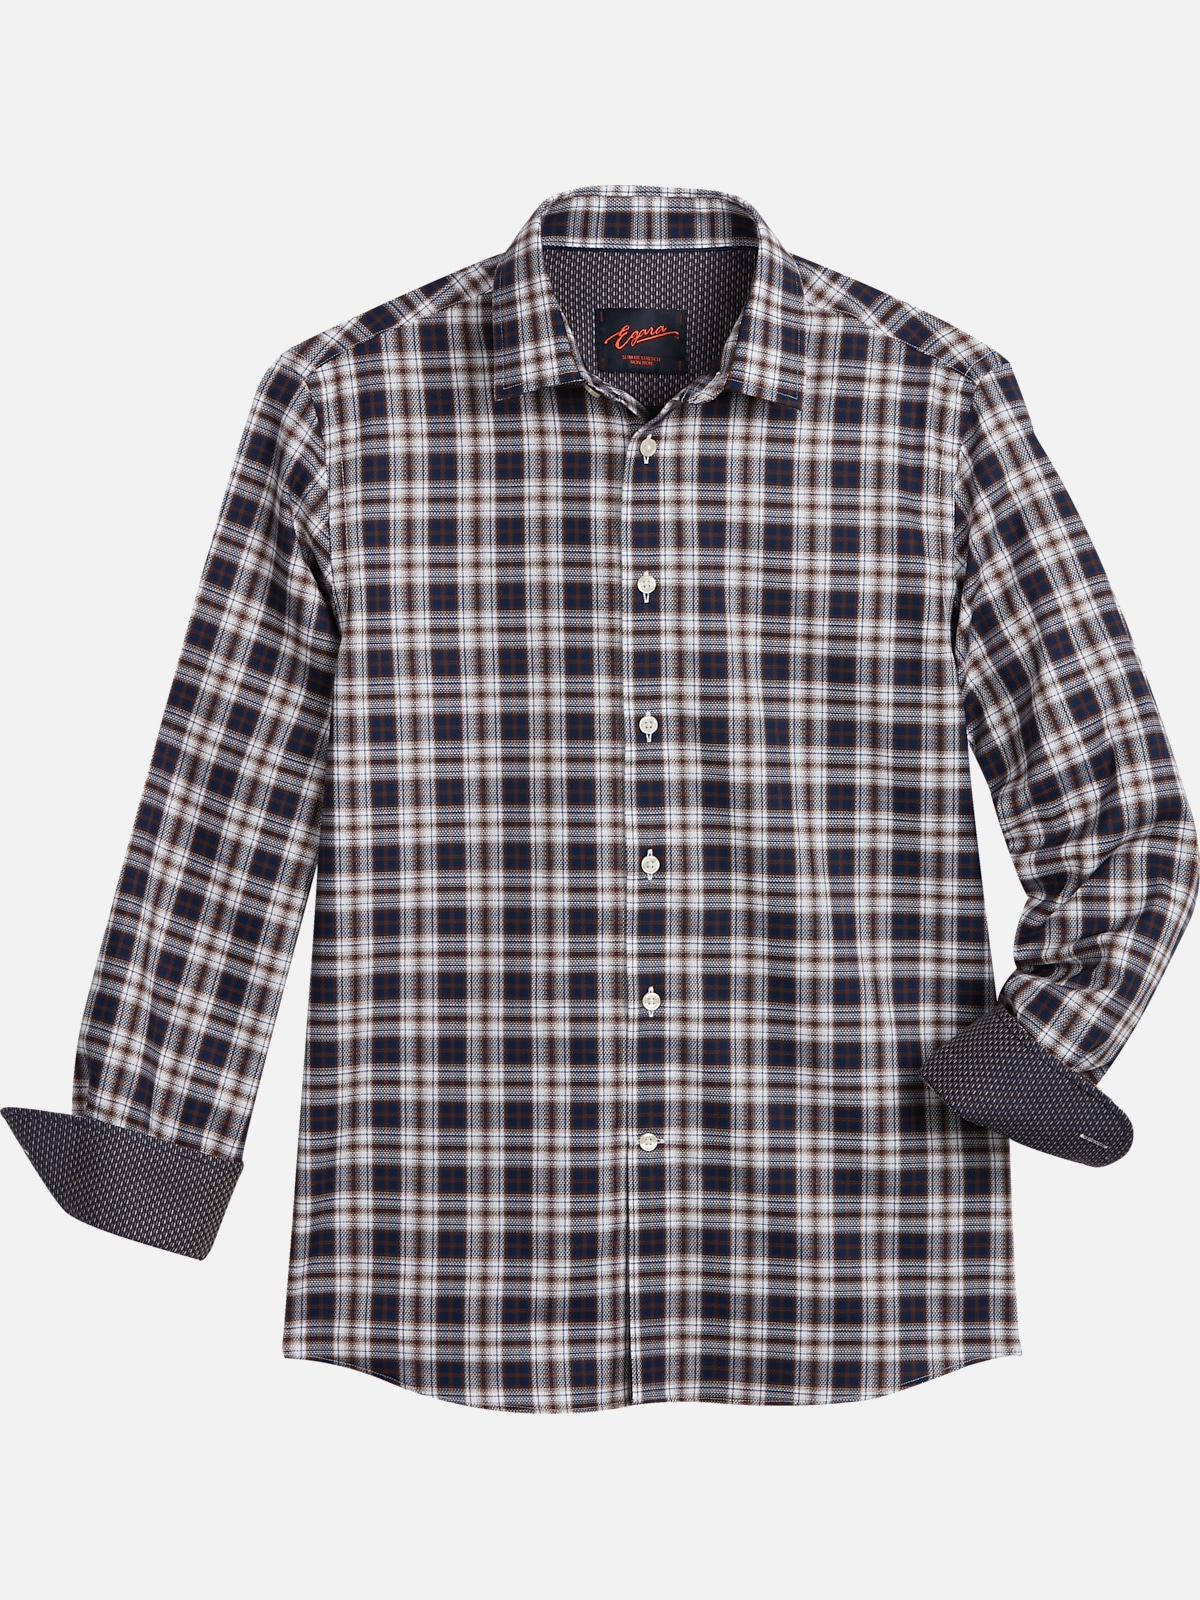 Shirts - Buy from Latest Collection of Shirt Online at Best Price